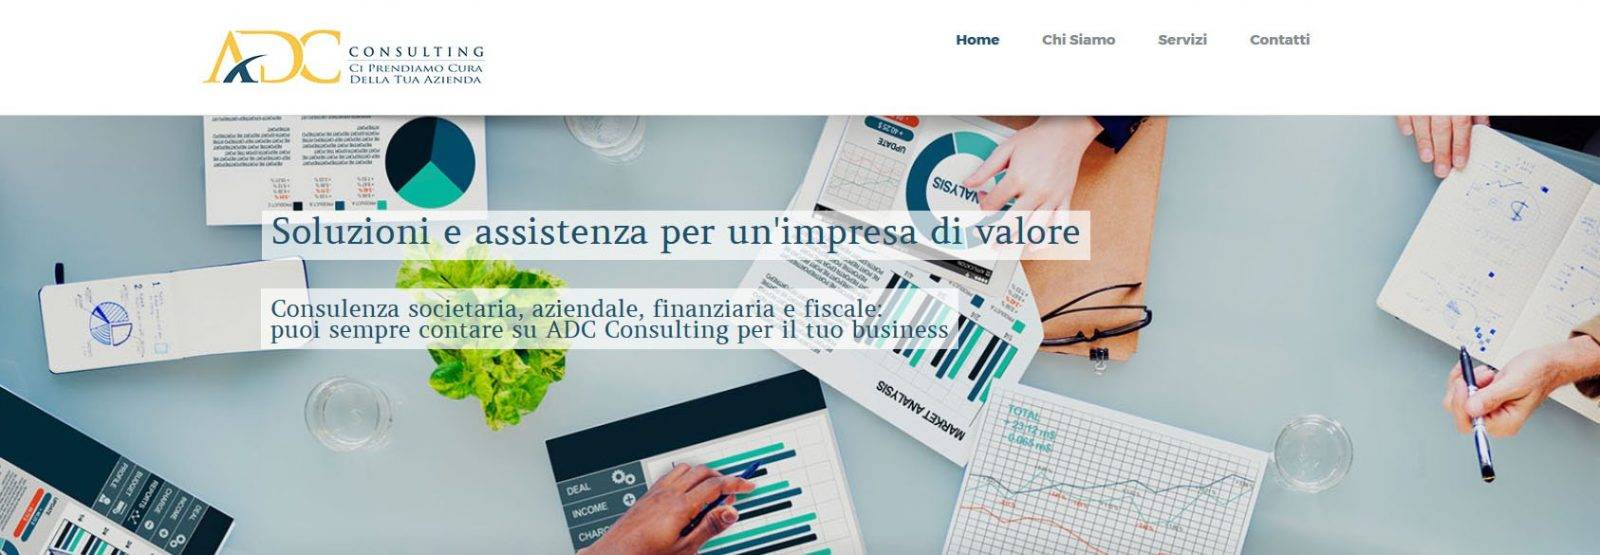 ADC Consulting